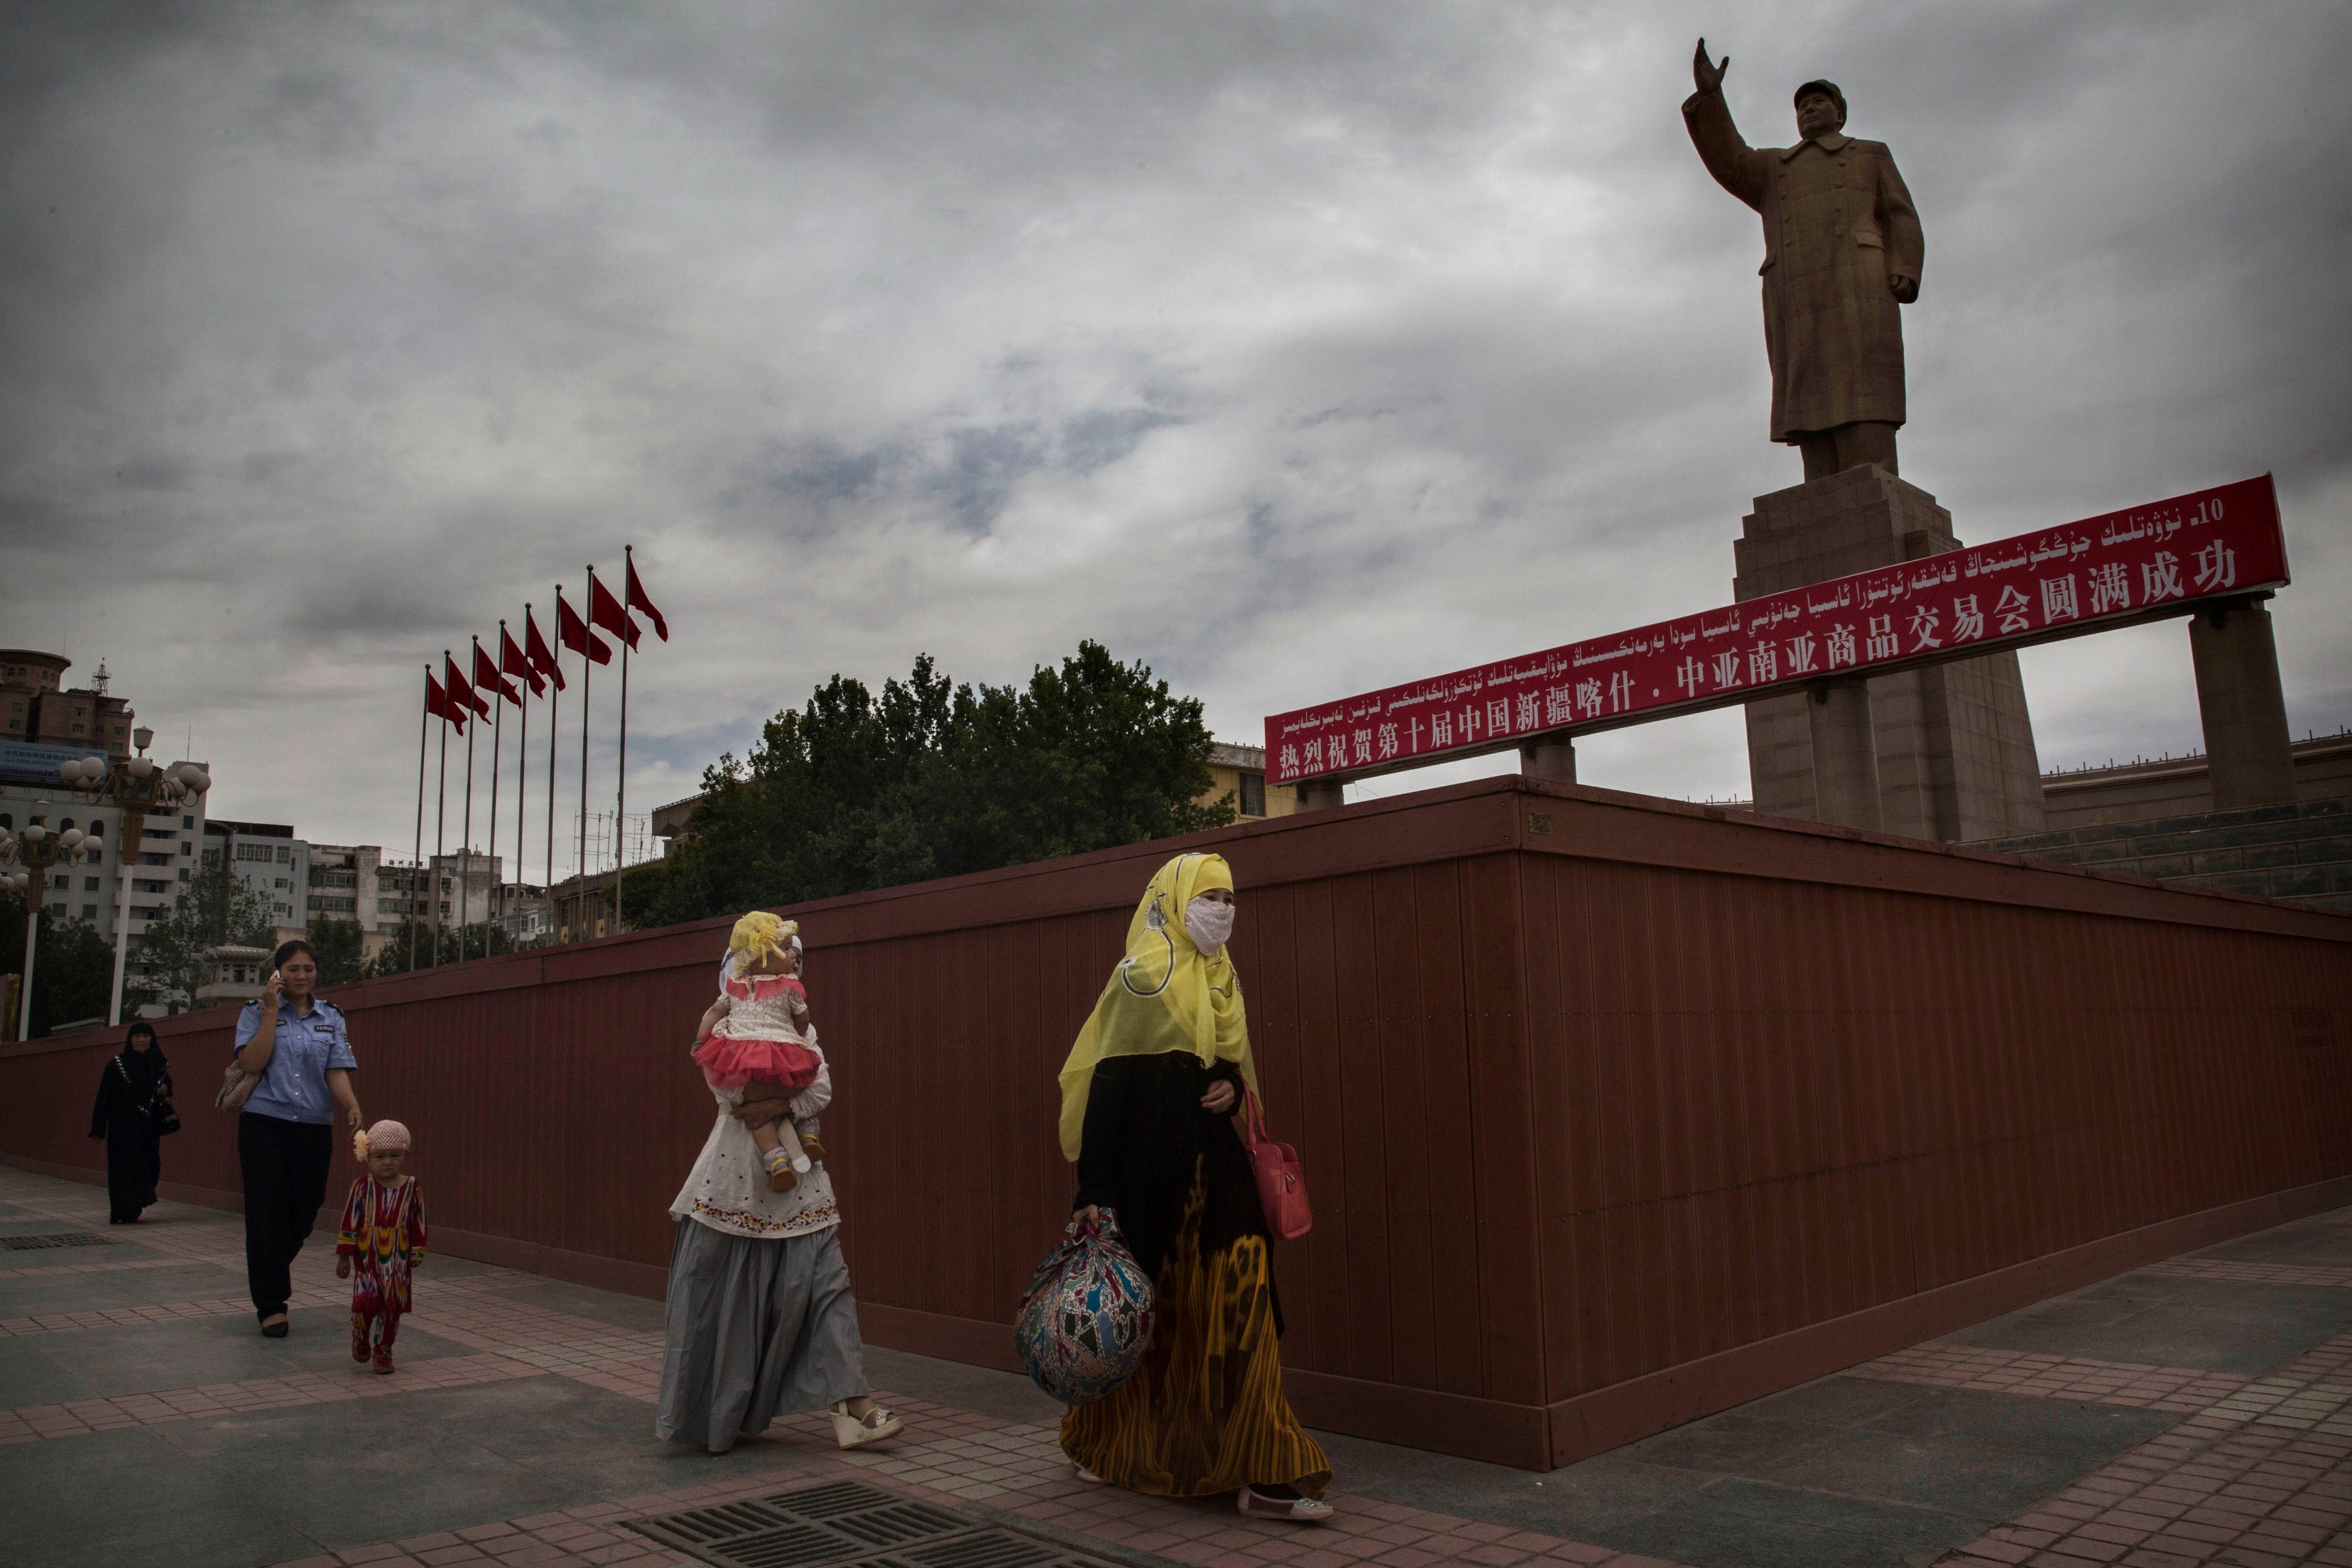 A veiled Muslim Uyghur woman walks passed a statue of Mao Zedong on July 31, 2014 in Kashgar, Xinjiang Uyghur Autonomous Region, China. (Kevin Frayer—Getty)